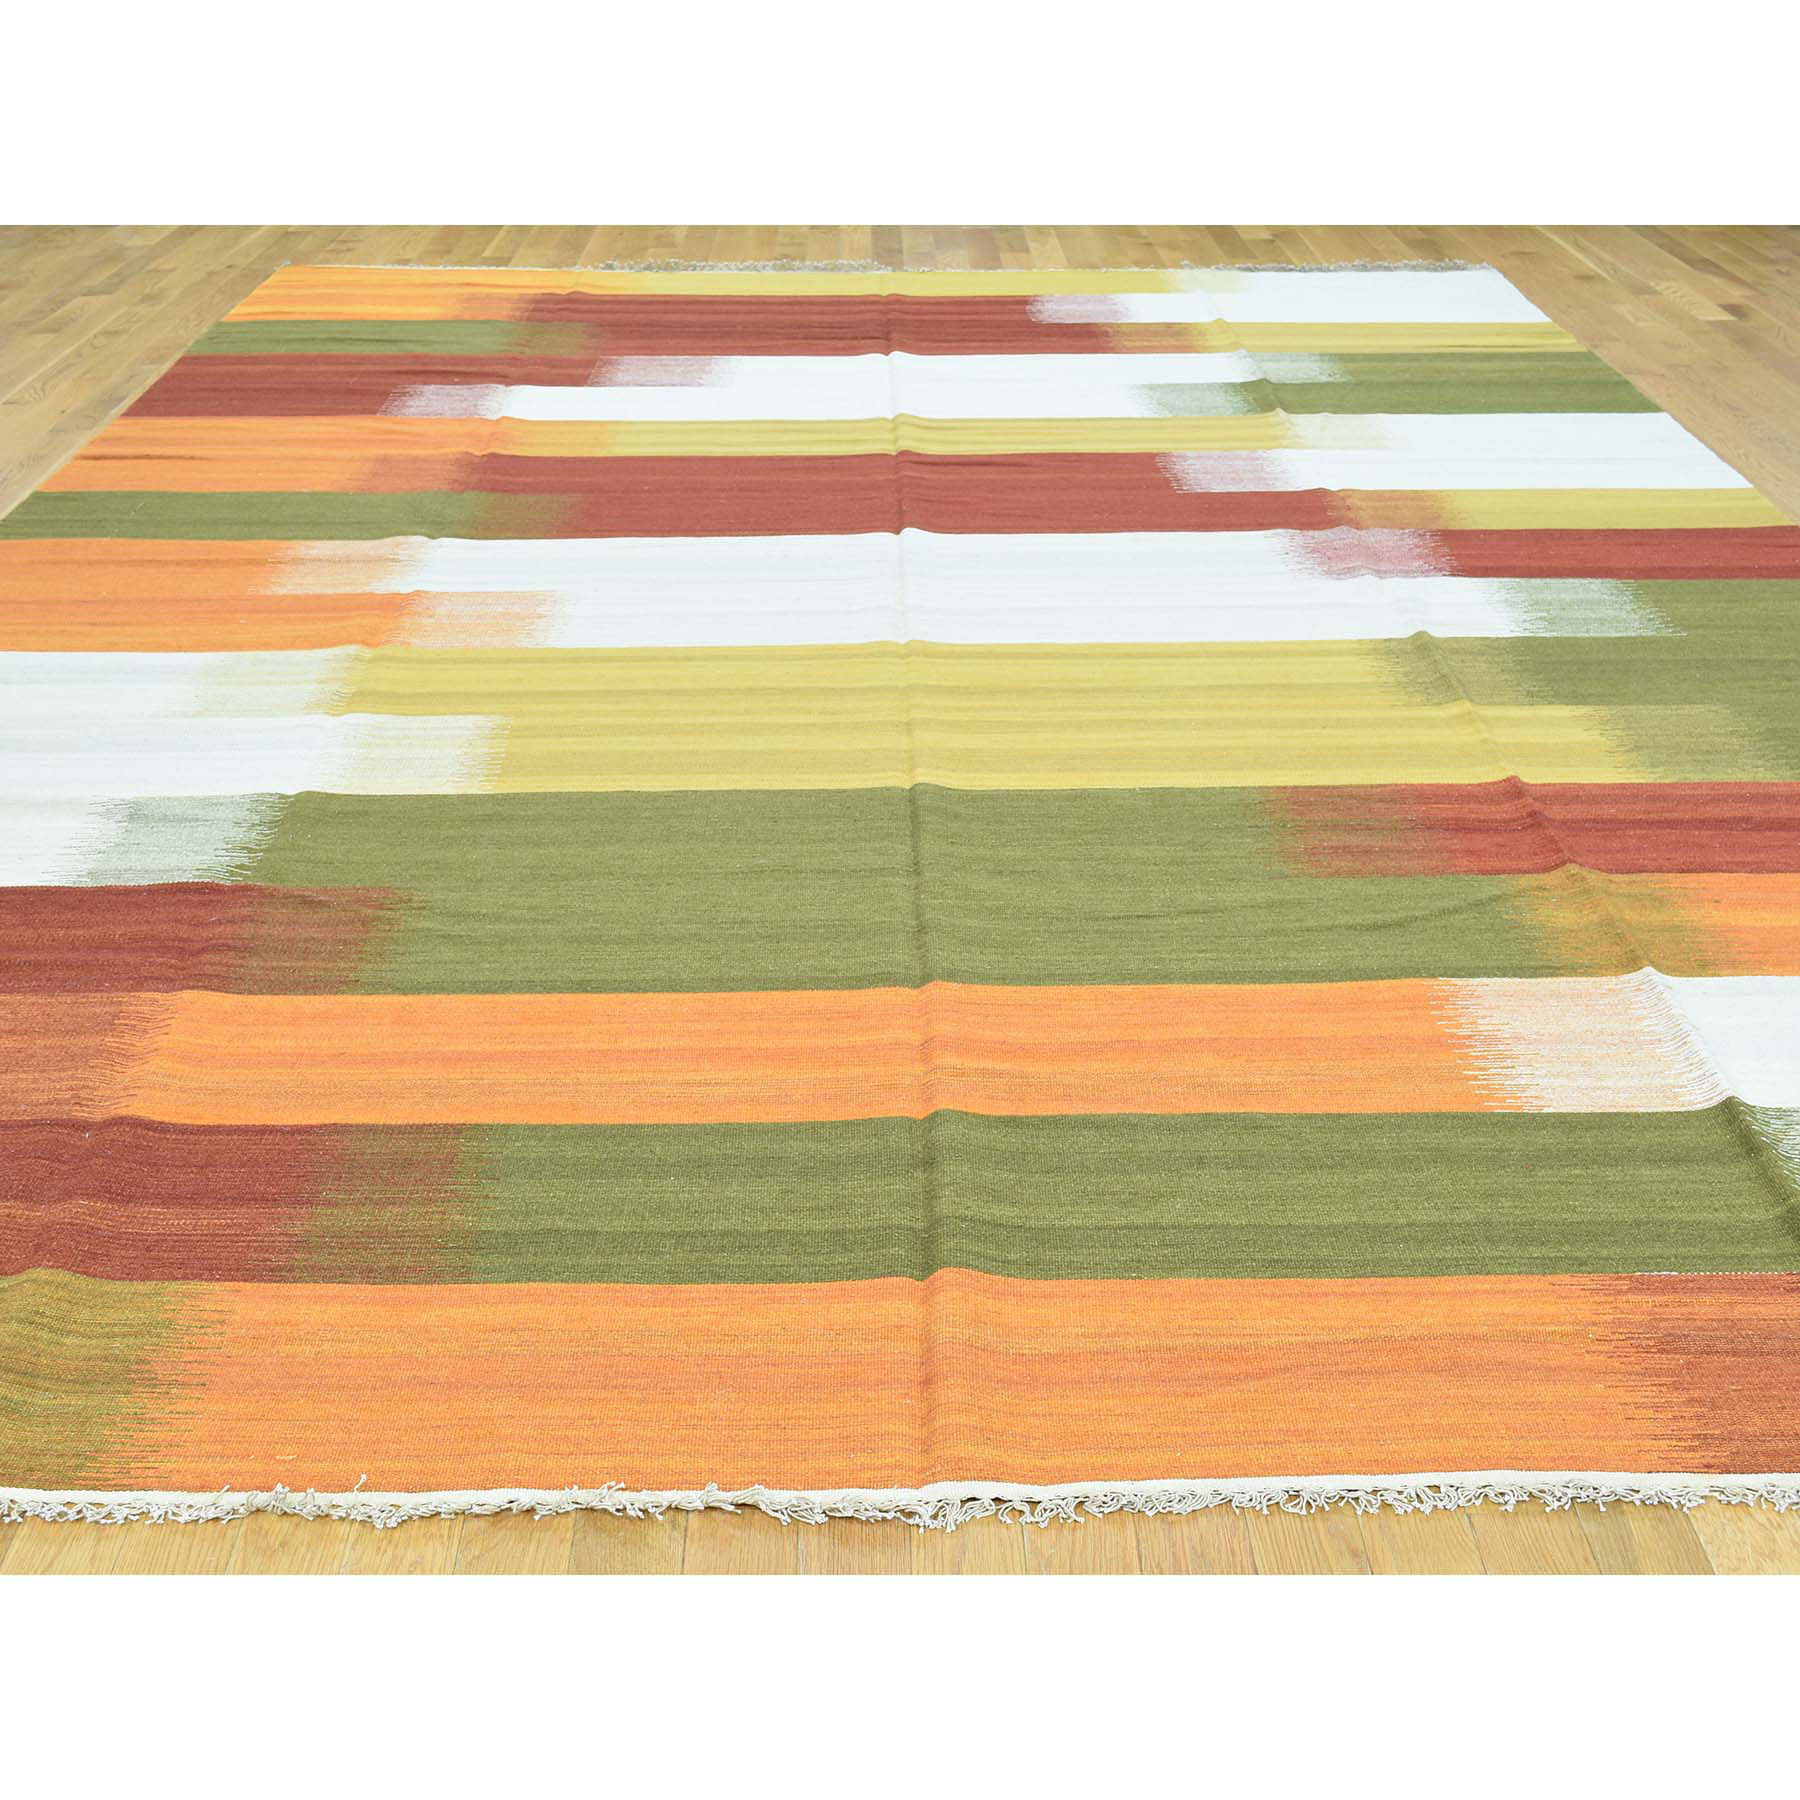 10'x14'3" Hand-Woven Flat Weave Colorful Durie Kilim Pure Wool Carpet 